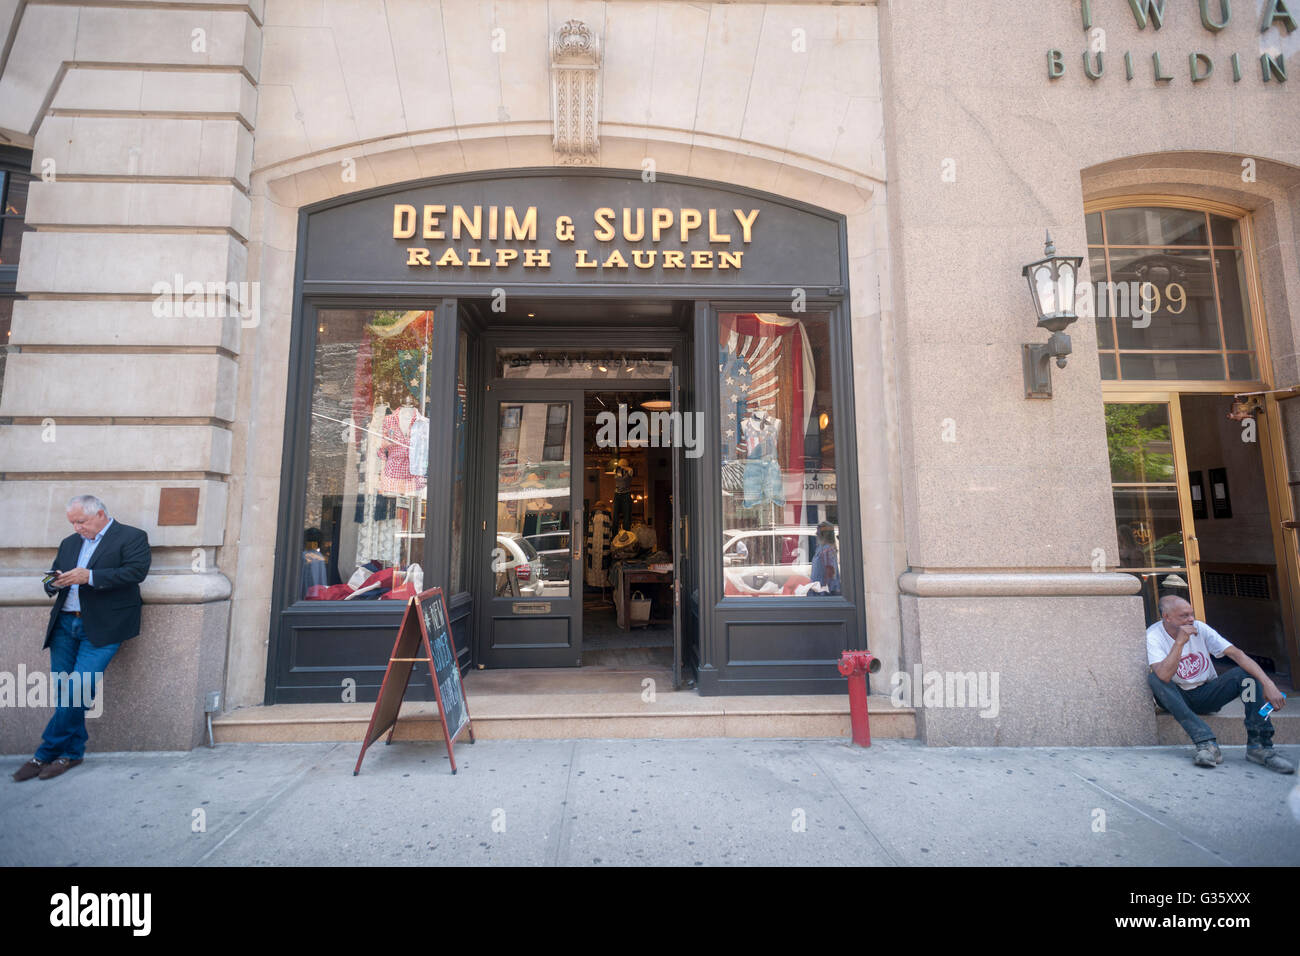 The Denim and Supply brand store of Ralph Lauren in Greenwich Village in New  York on Tuesday, June 7, 2016. Ralph Lauren announced that they will be  closing approximately 50 stores and